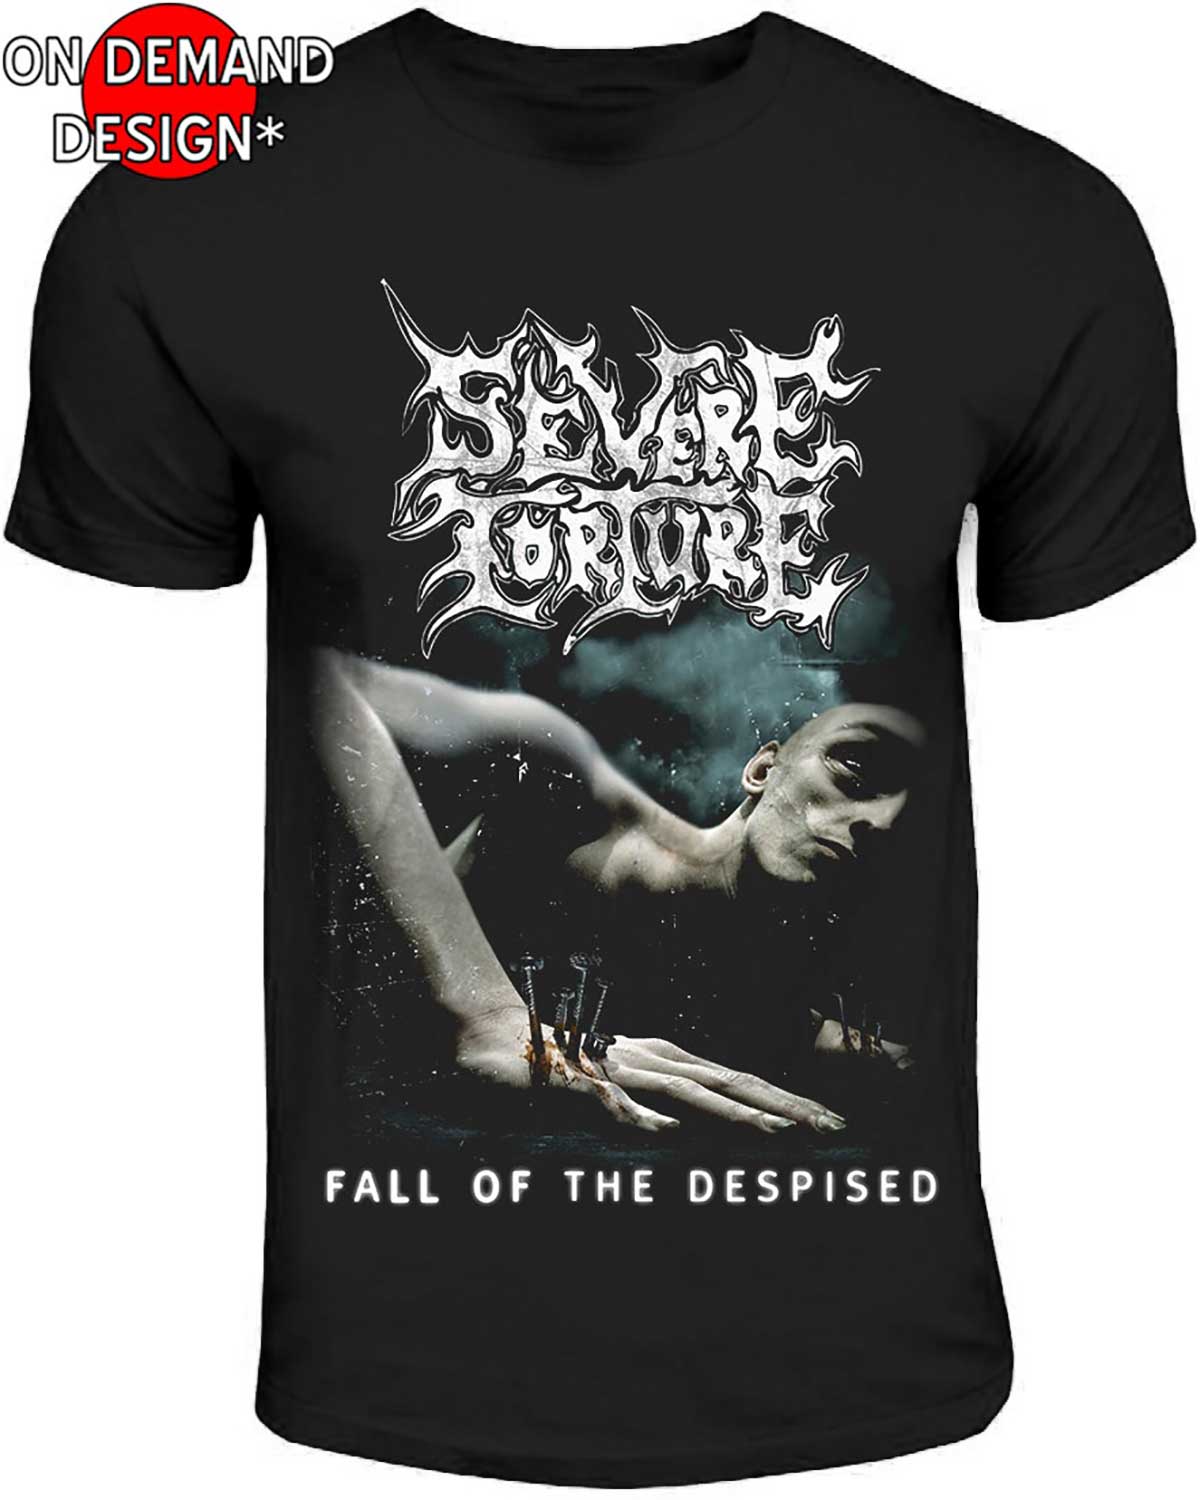 Severe Torture "Fall Of The Despised" T shirt